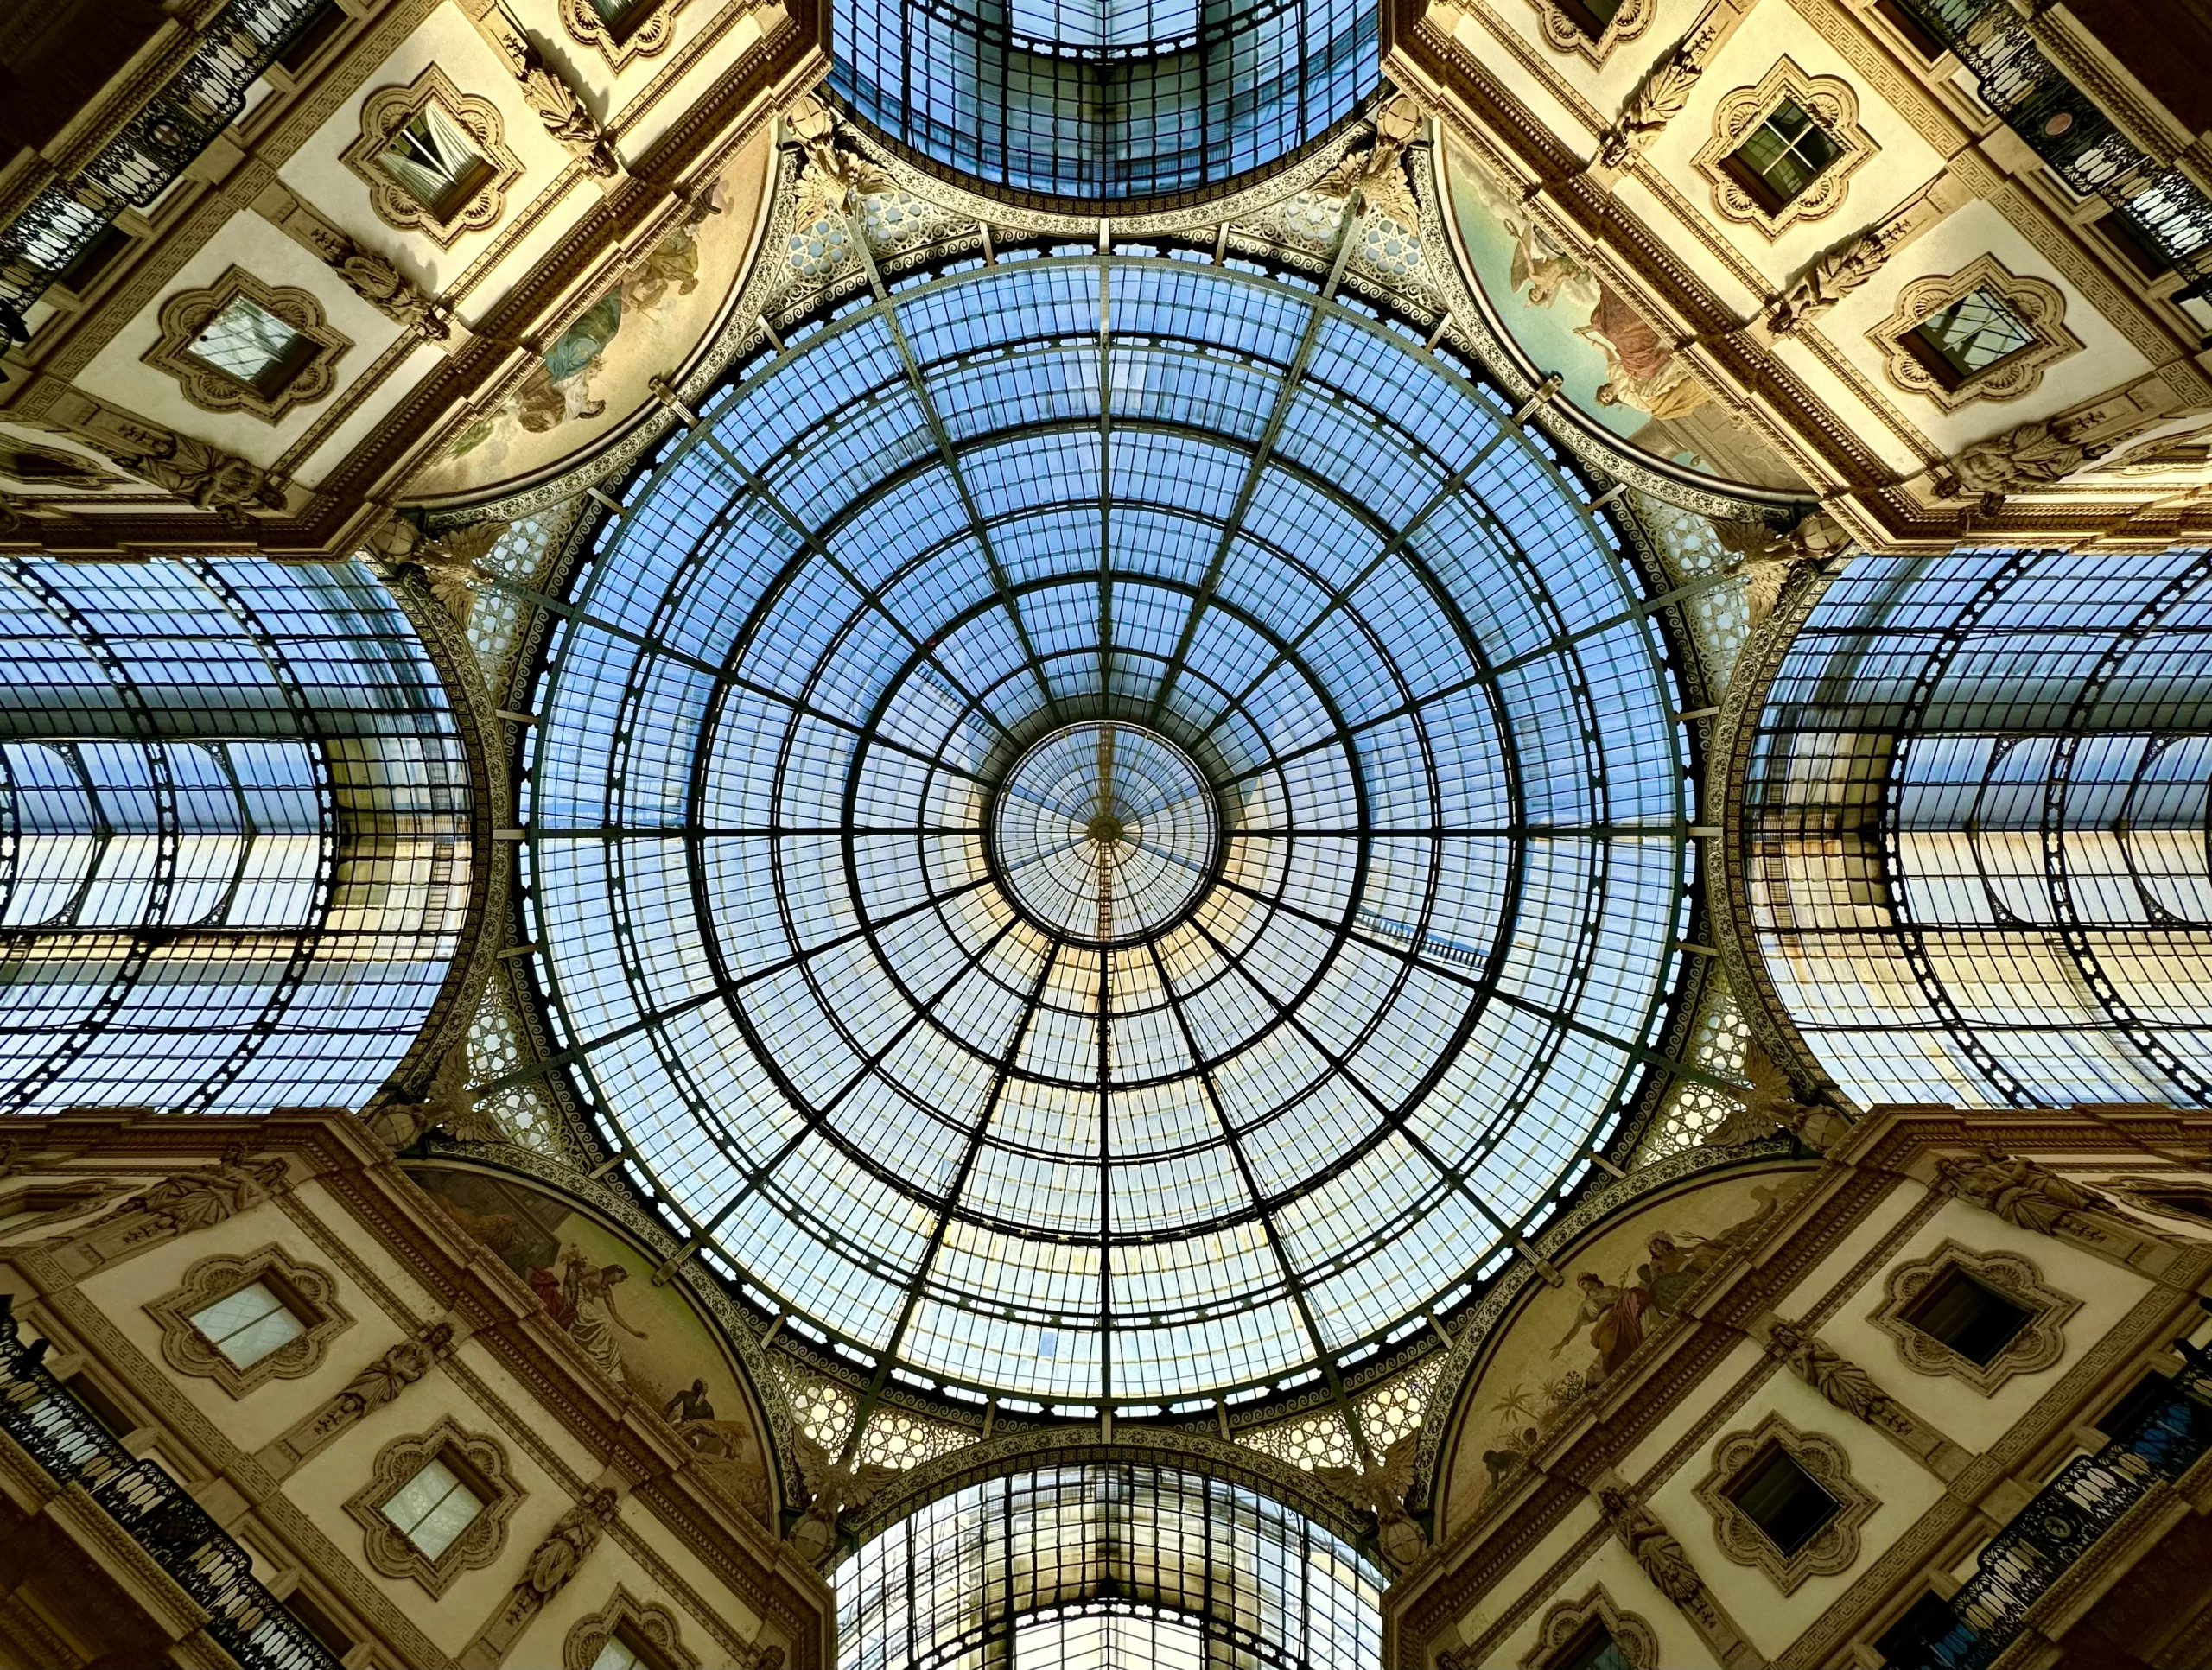 A view upwards to the glass dome of the "Galleria Vittorio Emanuele II" in Milan.